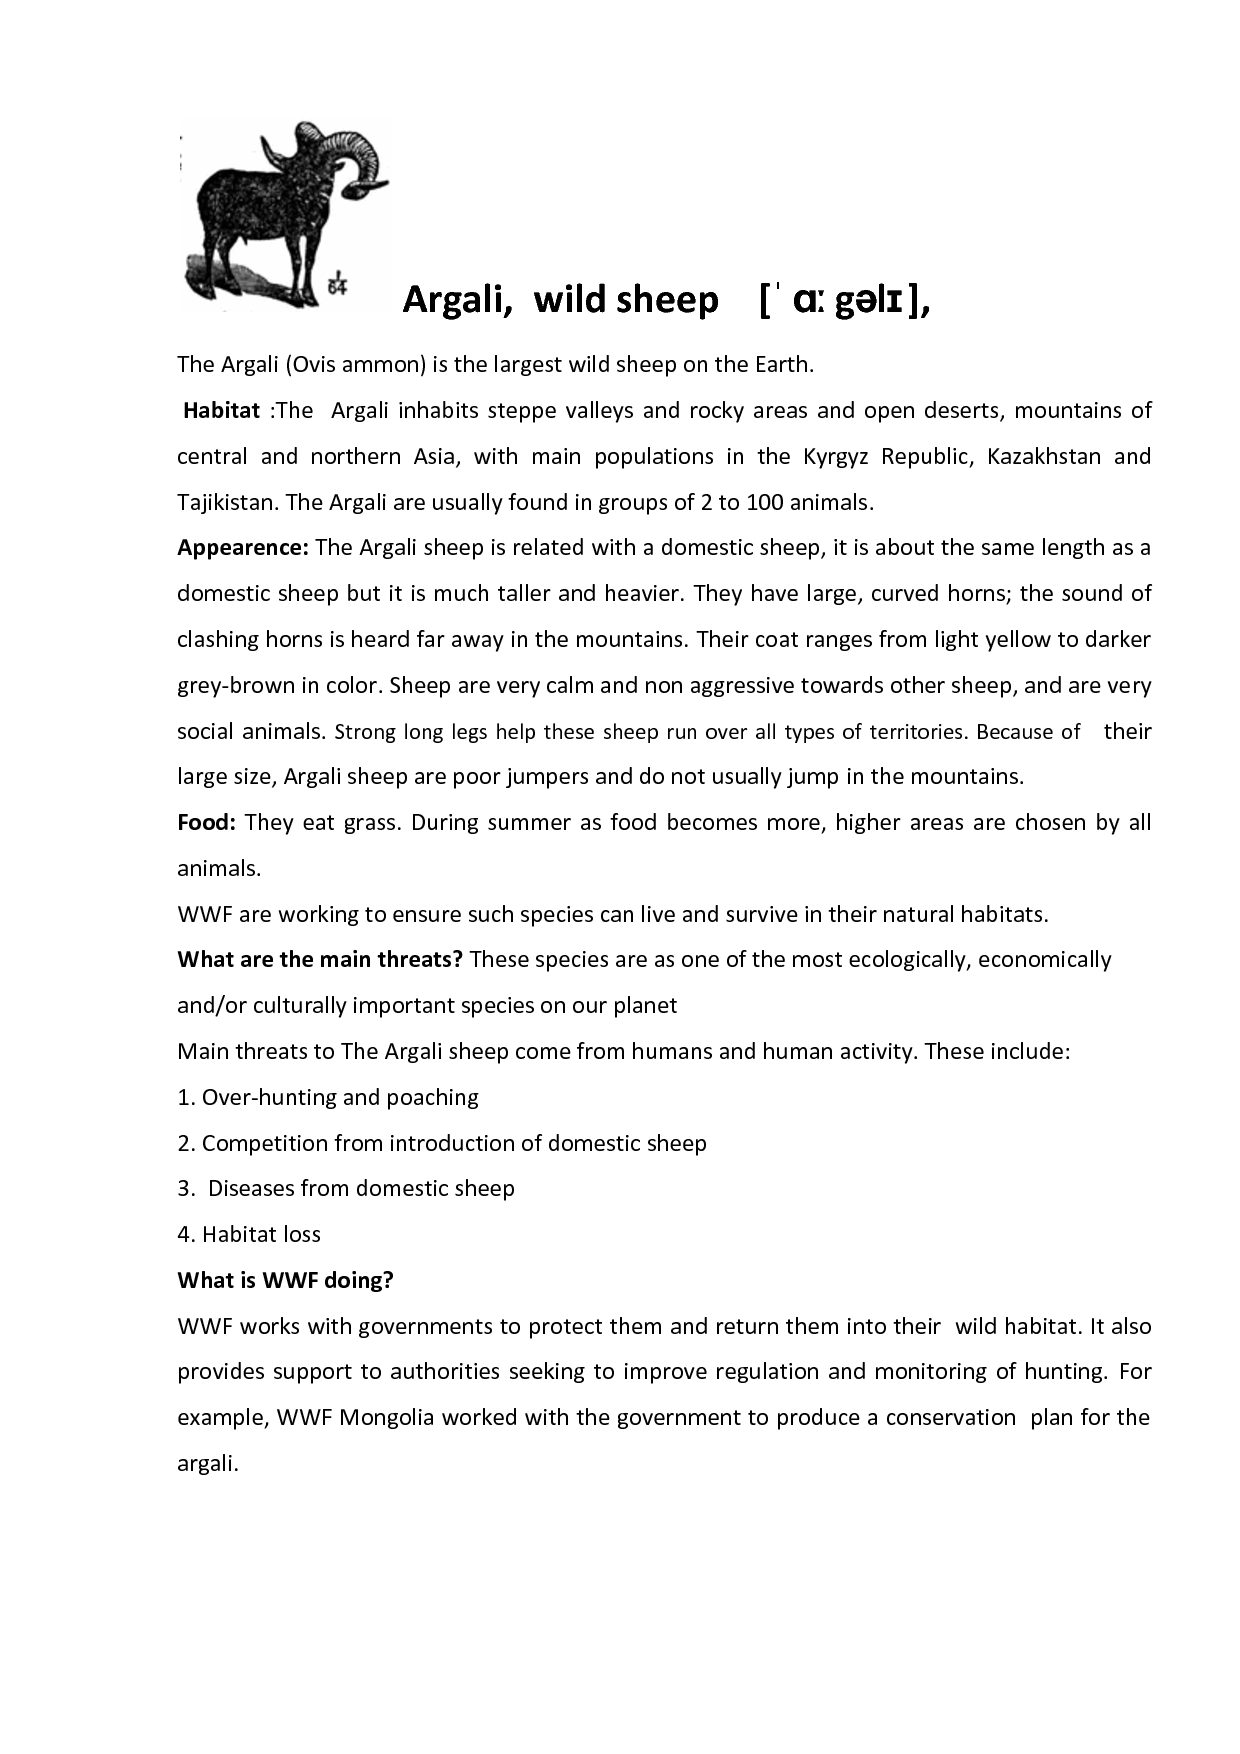 10-best-images-of-reading-worksheets-high-school-history-reading